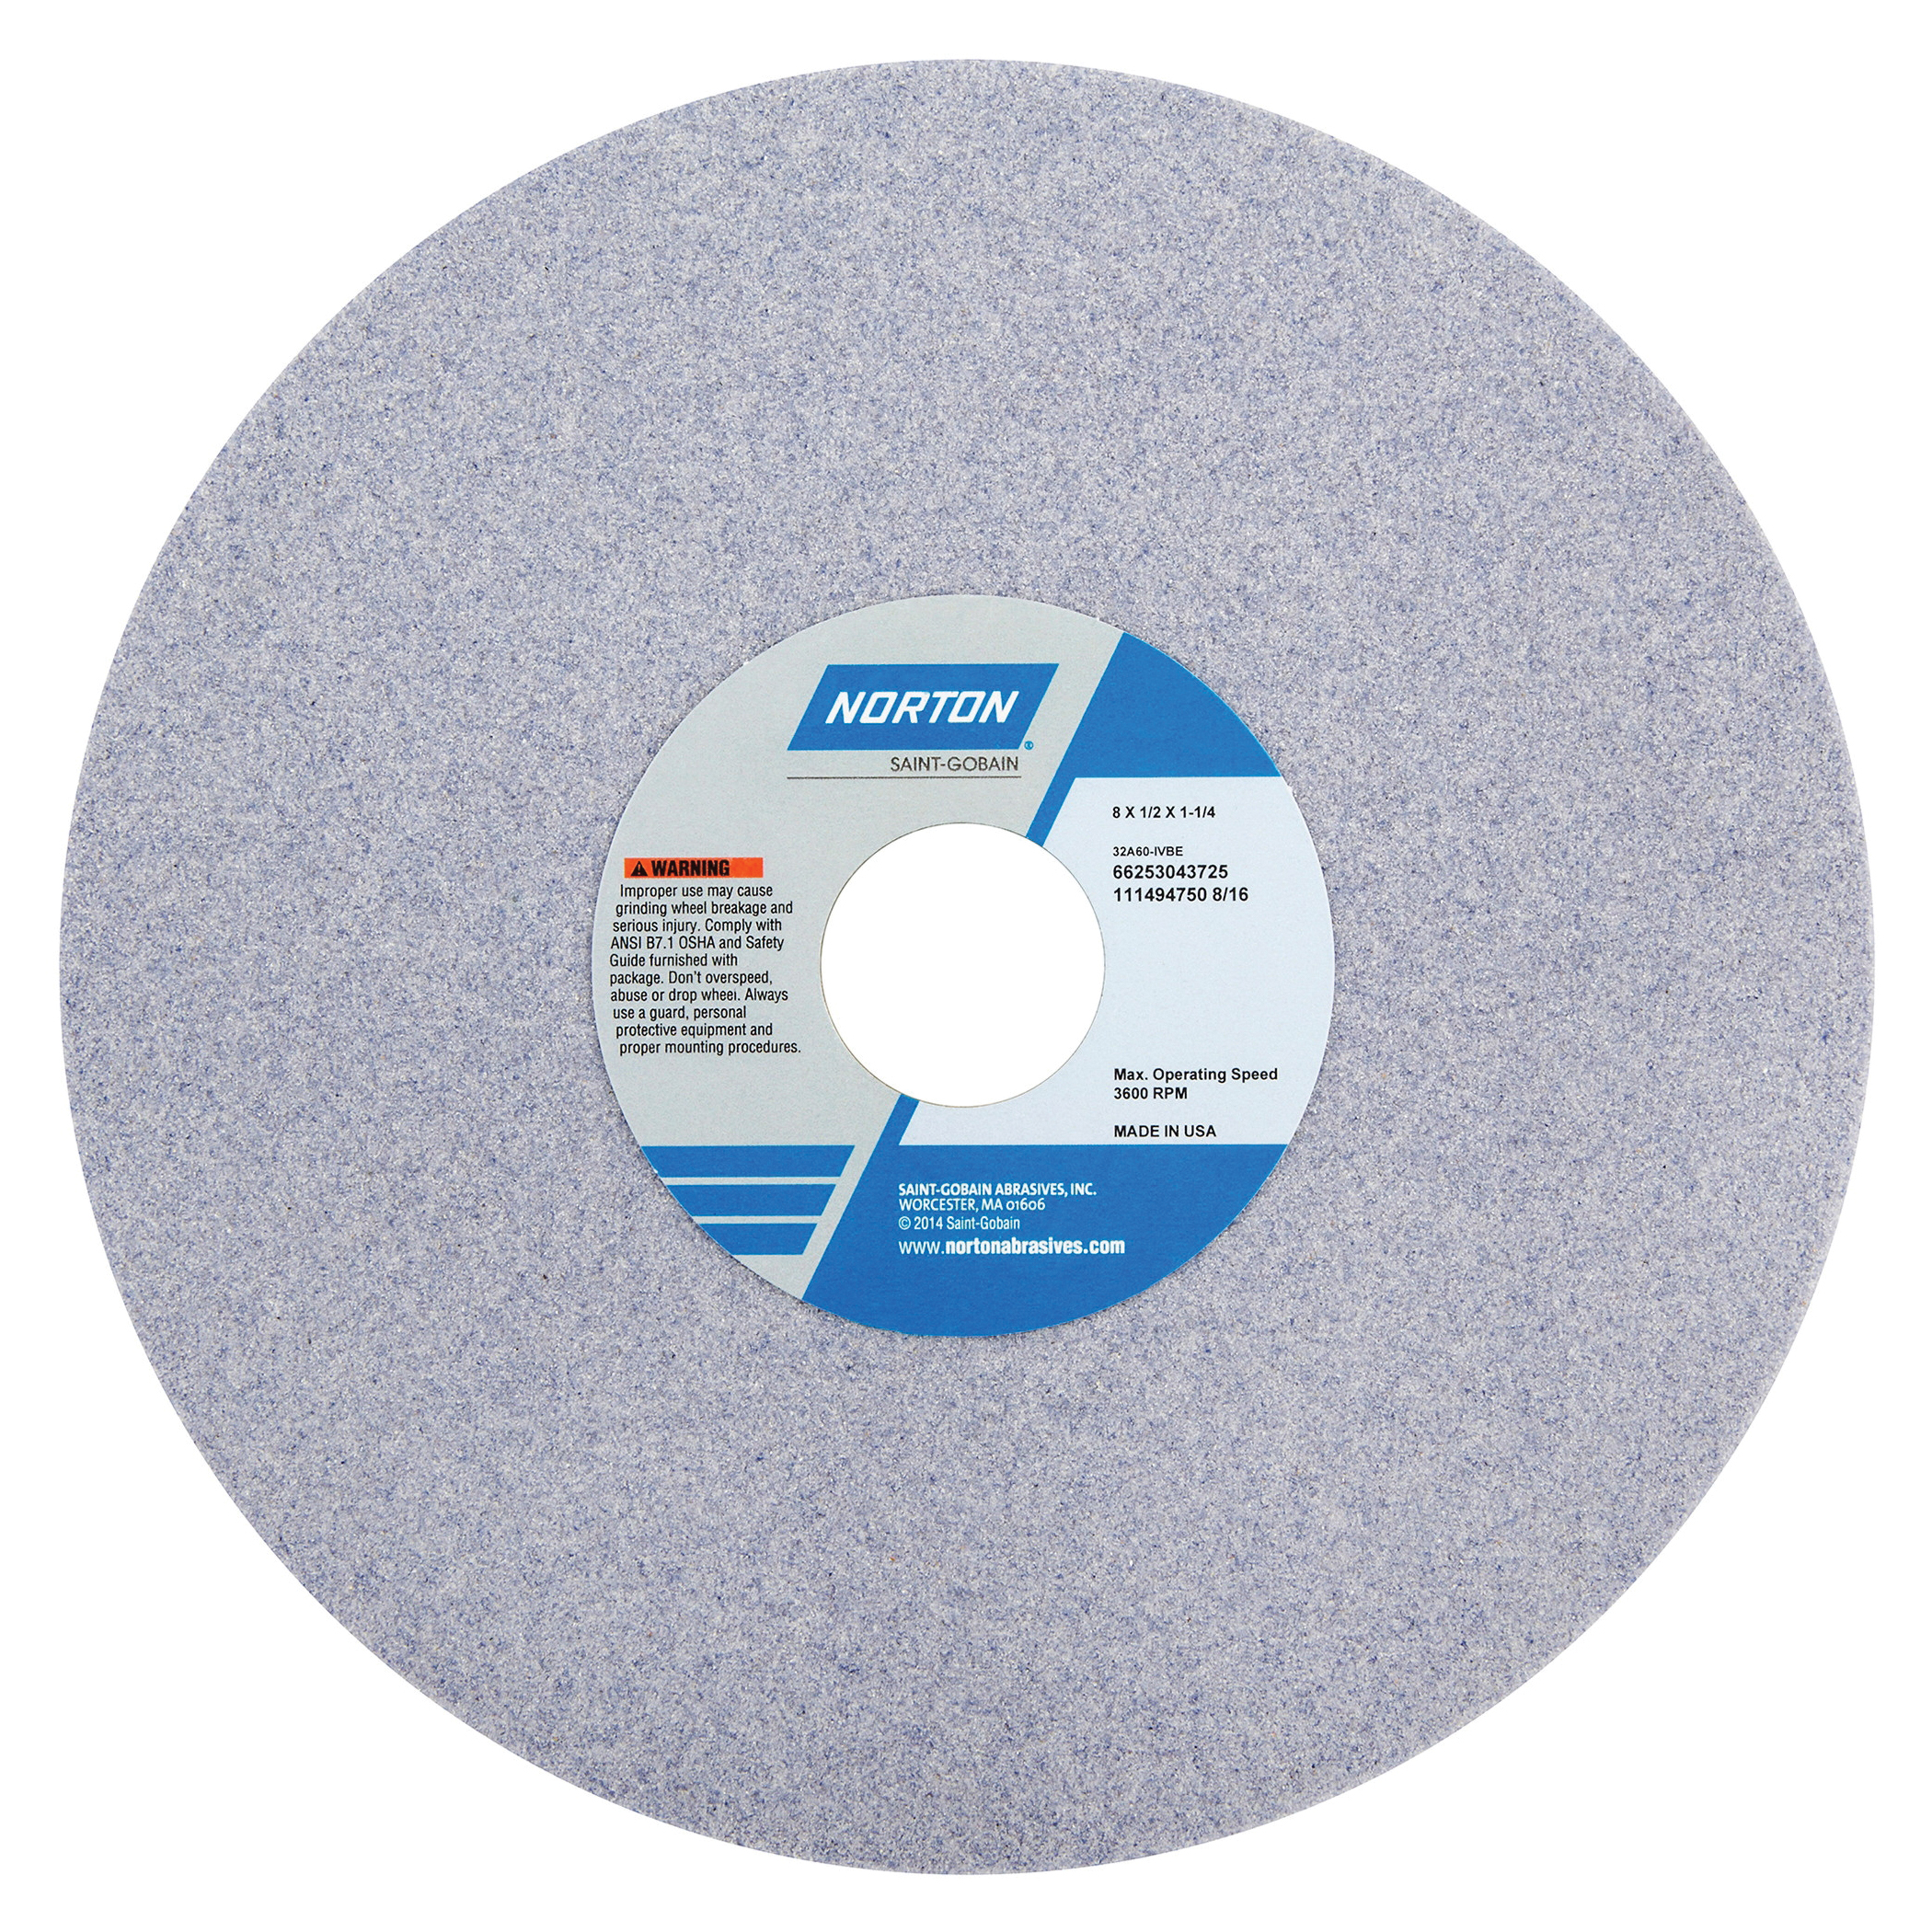 Norton® 66253043715 32A Straight Toolroom Wheel, 8 in Dia x 1/2 in THK, 1-1/4 in Center Hole, 46 Grit, Aluminum Oxide Abrasive